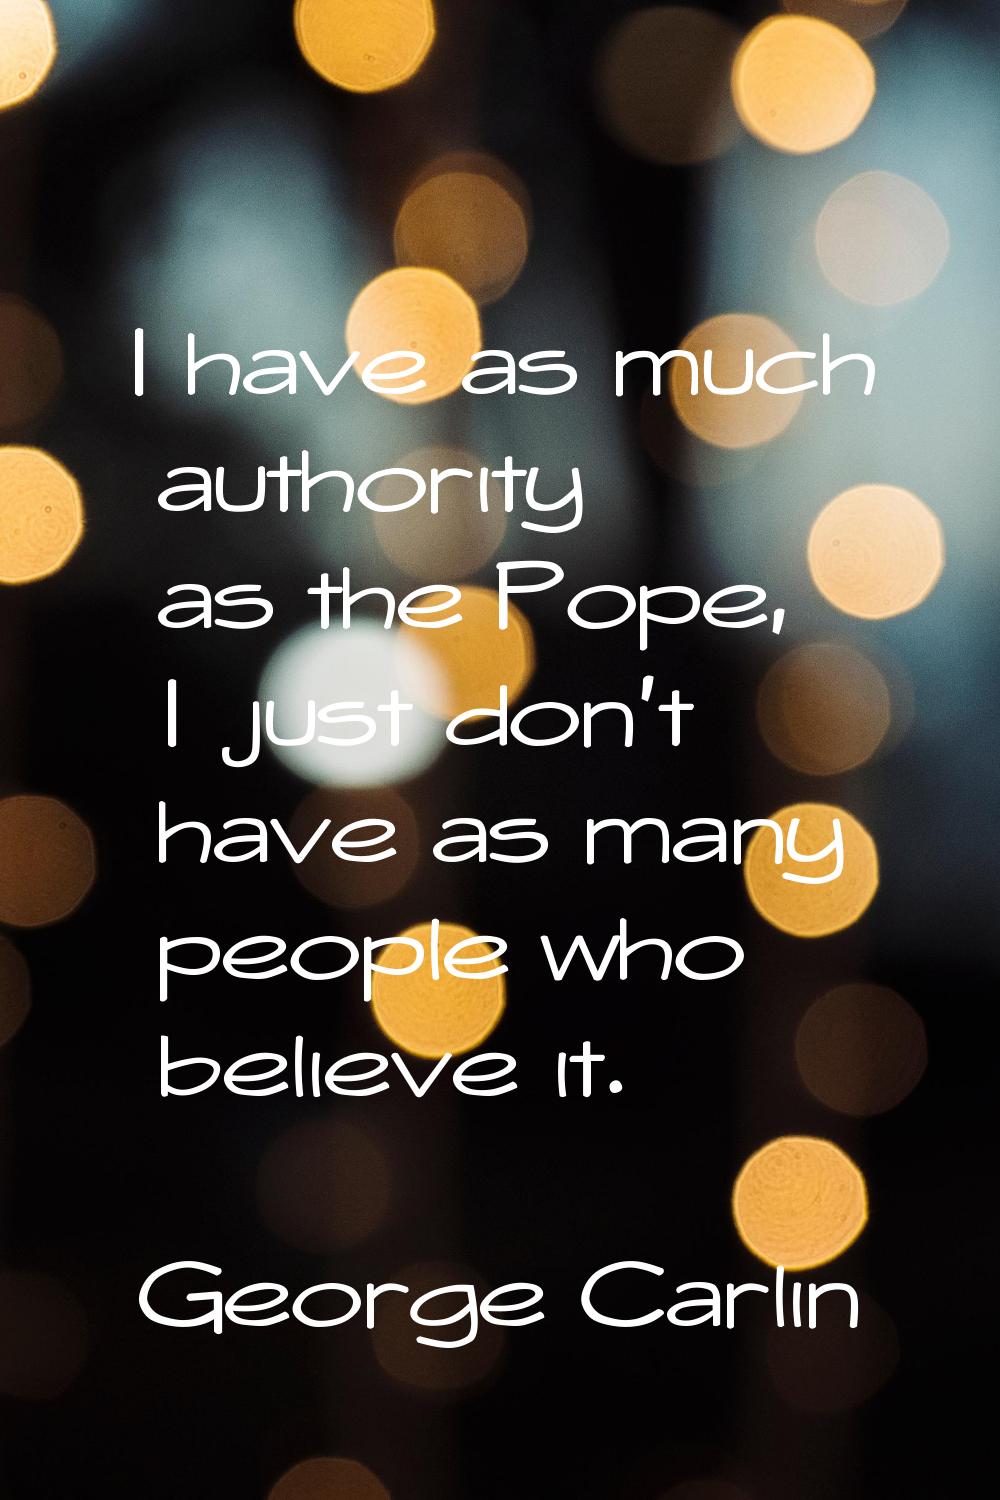 I have as much authority as the Pope, I just don't have as many people who believe it.